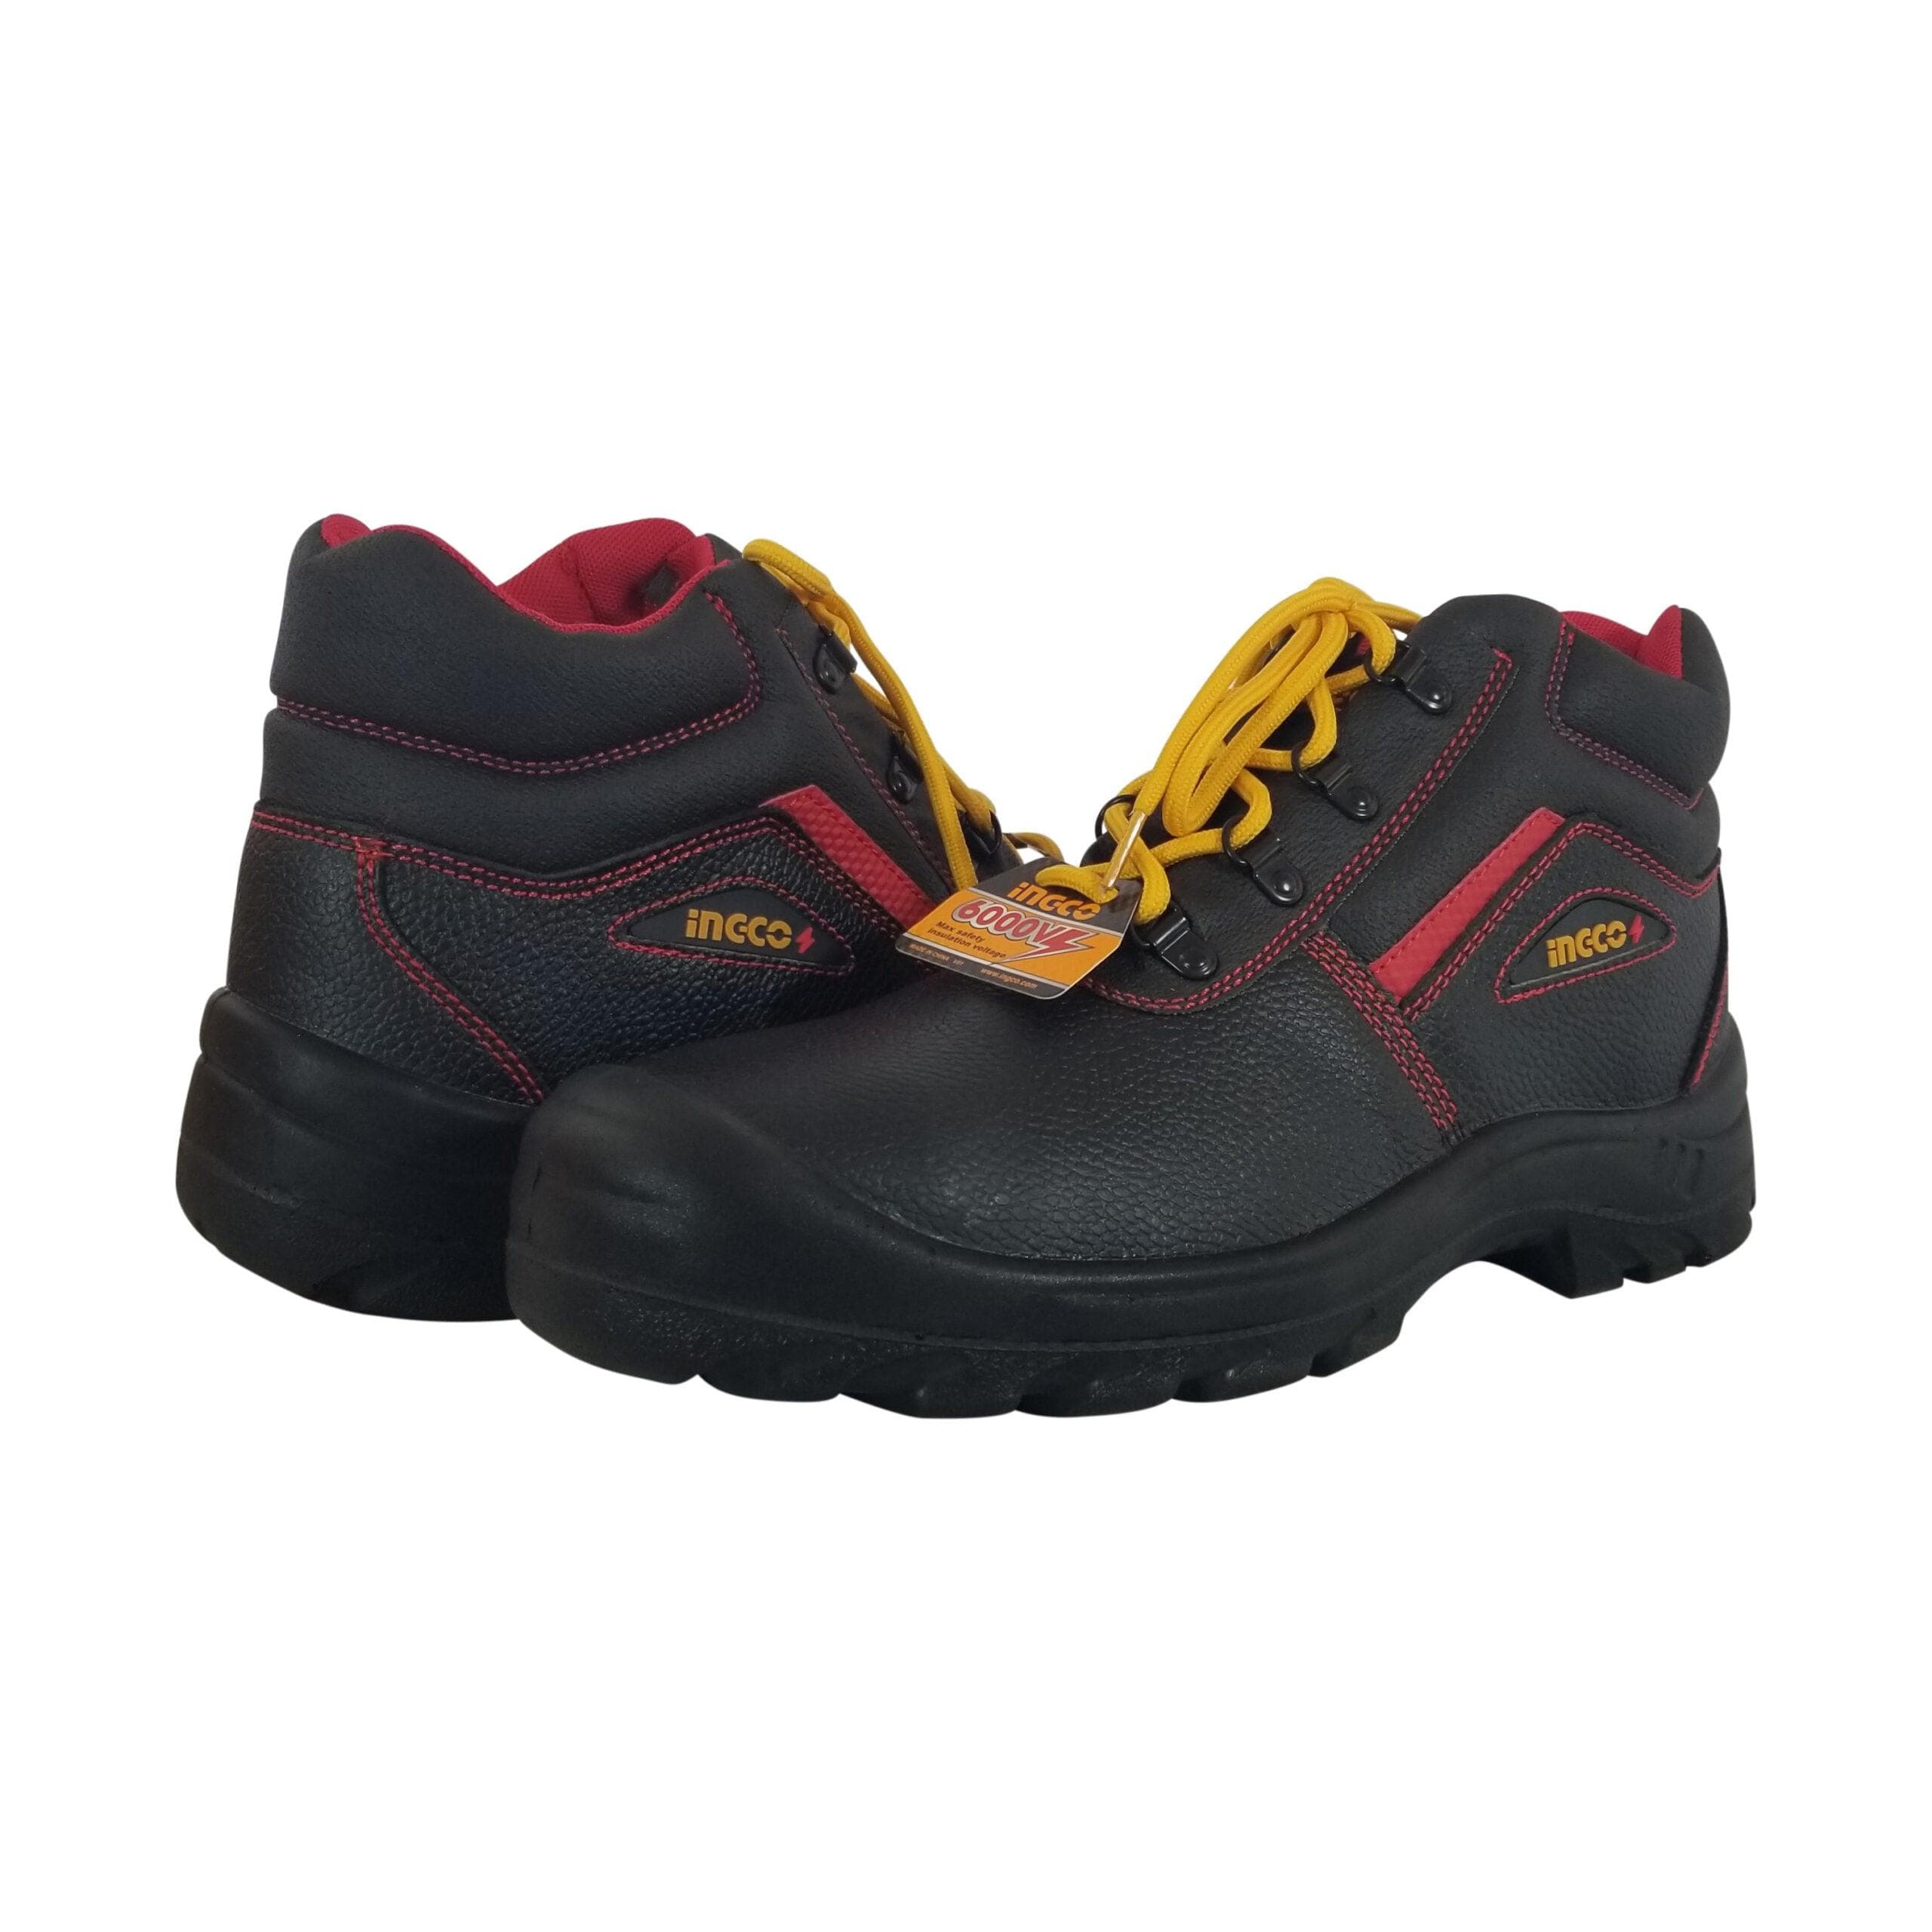 Ingco Insulated Safety Boots - SSH07IDSB | Shop Online in Accra, Ghana - Supply Master Boots & Footwear Buy Tools hardware Building materials